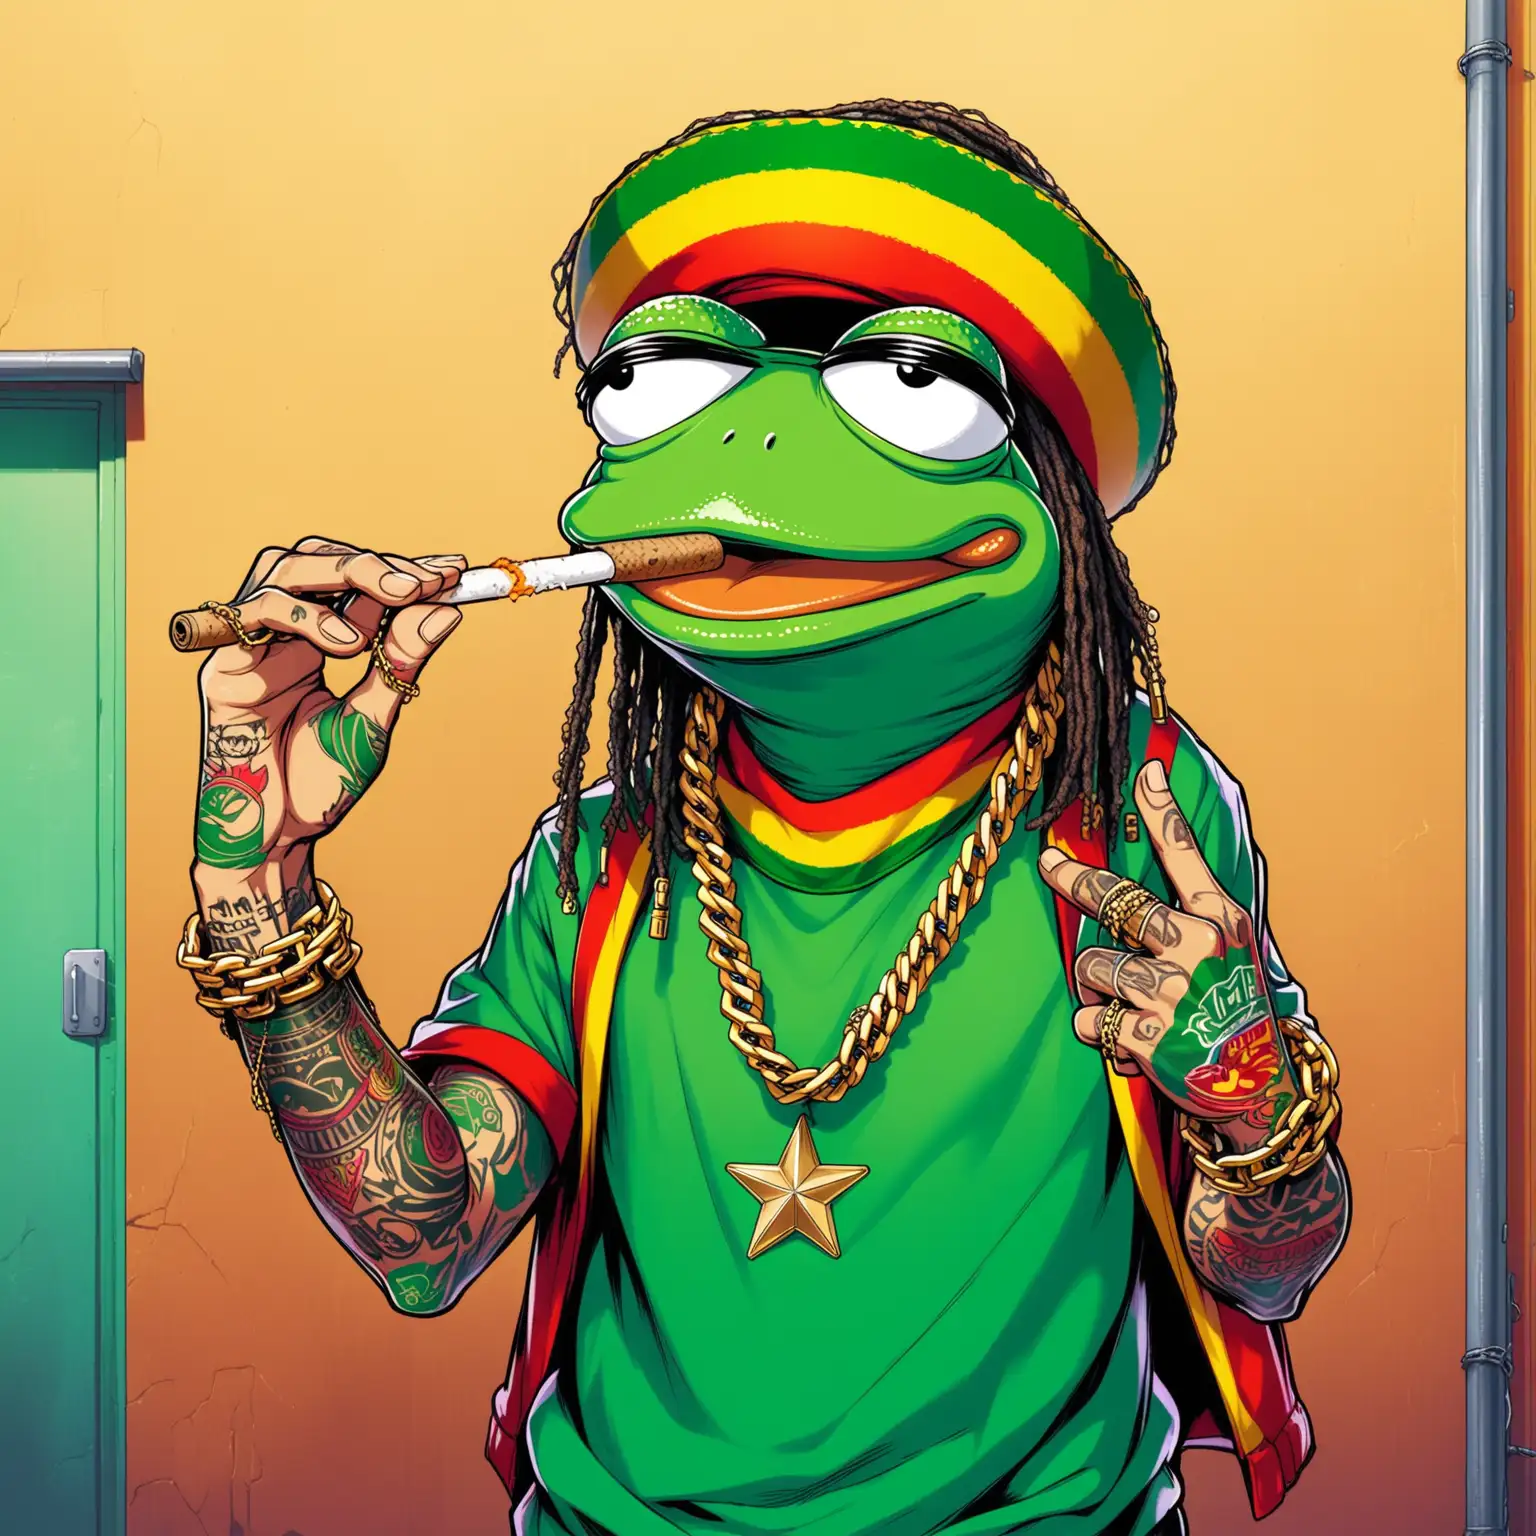 Pepe the Frog in a rasta costume with a joint in his hand, a chain around his neck and tattoos on his fingers should represent a rapper.
Pepe, dressed in a vibrant rasta-inspired outfit, a chunky gold chain around his neck and tattoos on his fingers, holding a joint, embodies the modern rapper persona. The presence of rap culture attributes like tattoos, gold chains and a joint adds elements of street culture and urban life to his image.